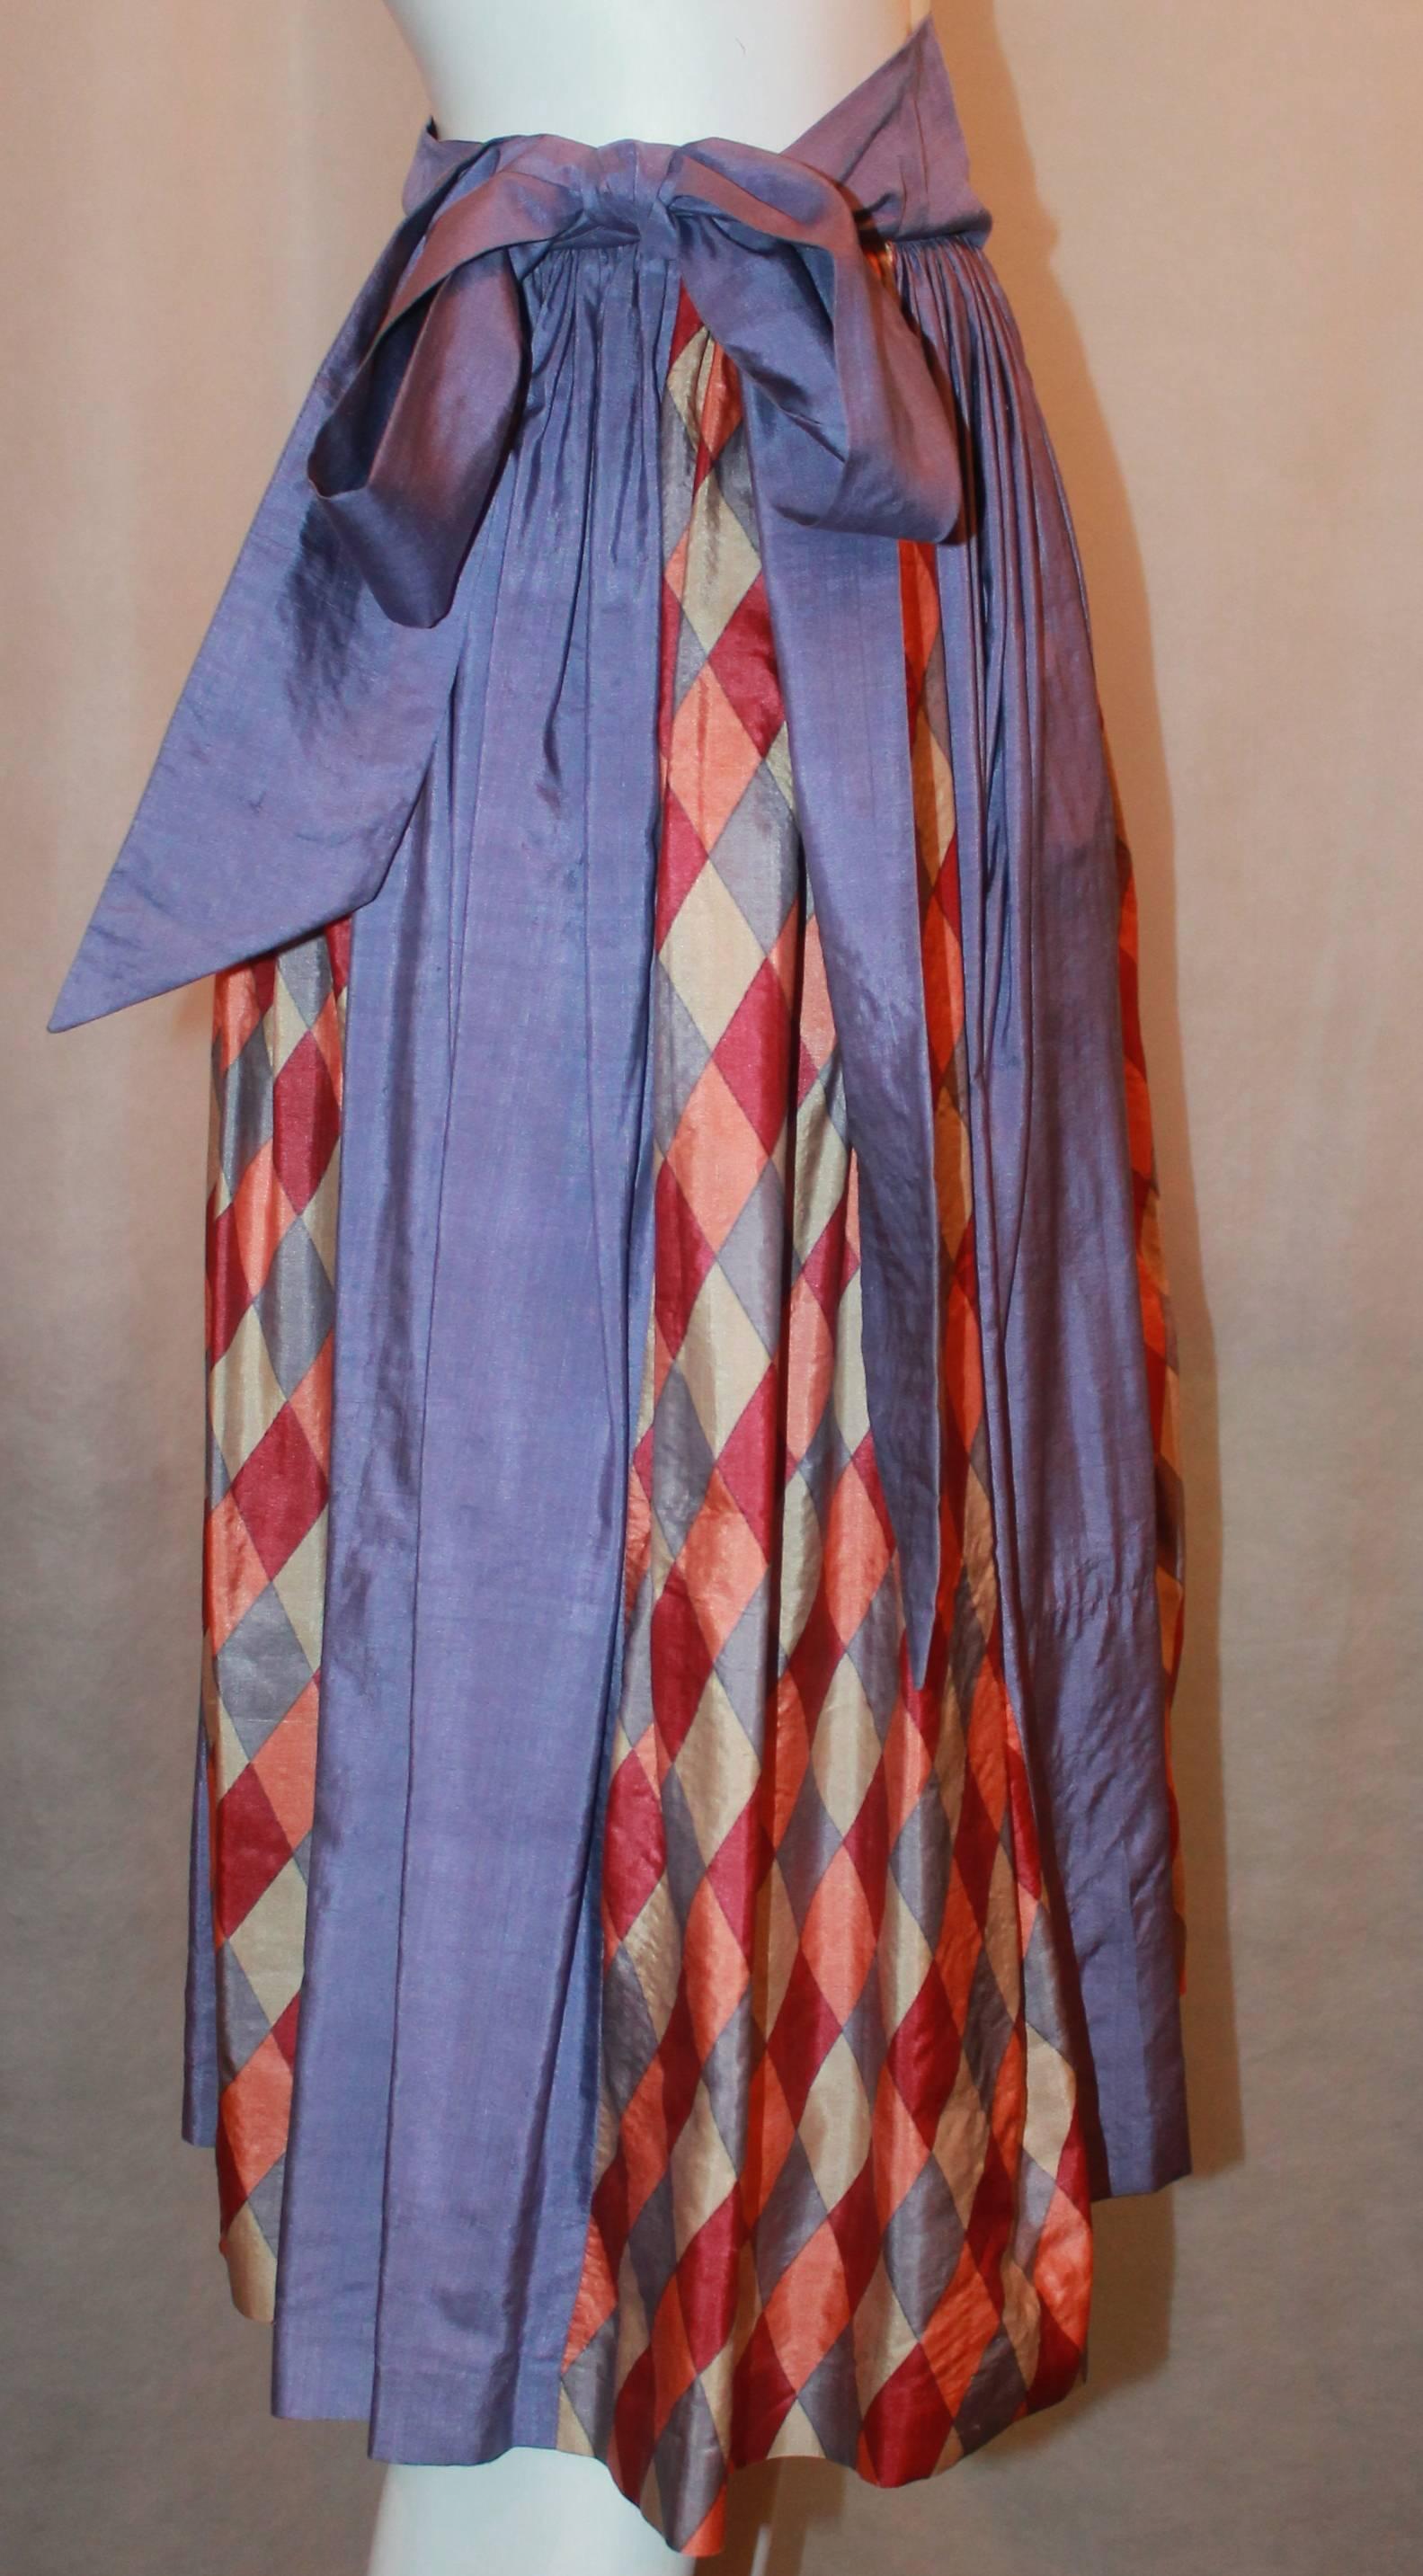 YSL Rive Gauche 1970's Lavender Silk Mid Length Skirt w/ Diamond Print - 36.  This vintage skirt is in very good condition, with no flaws other than wear consistent with its age.  It has vertical stripes alternating between solid purple and a